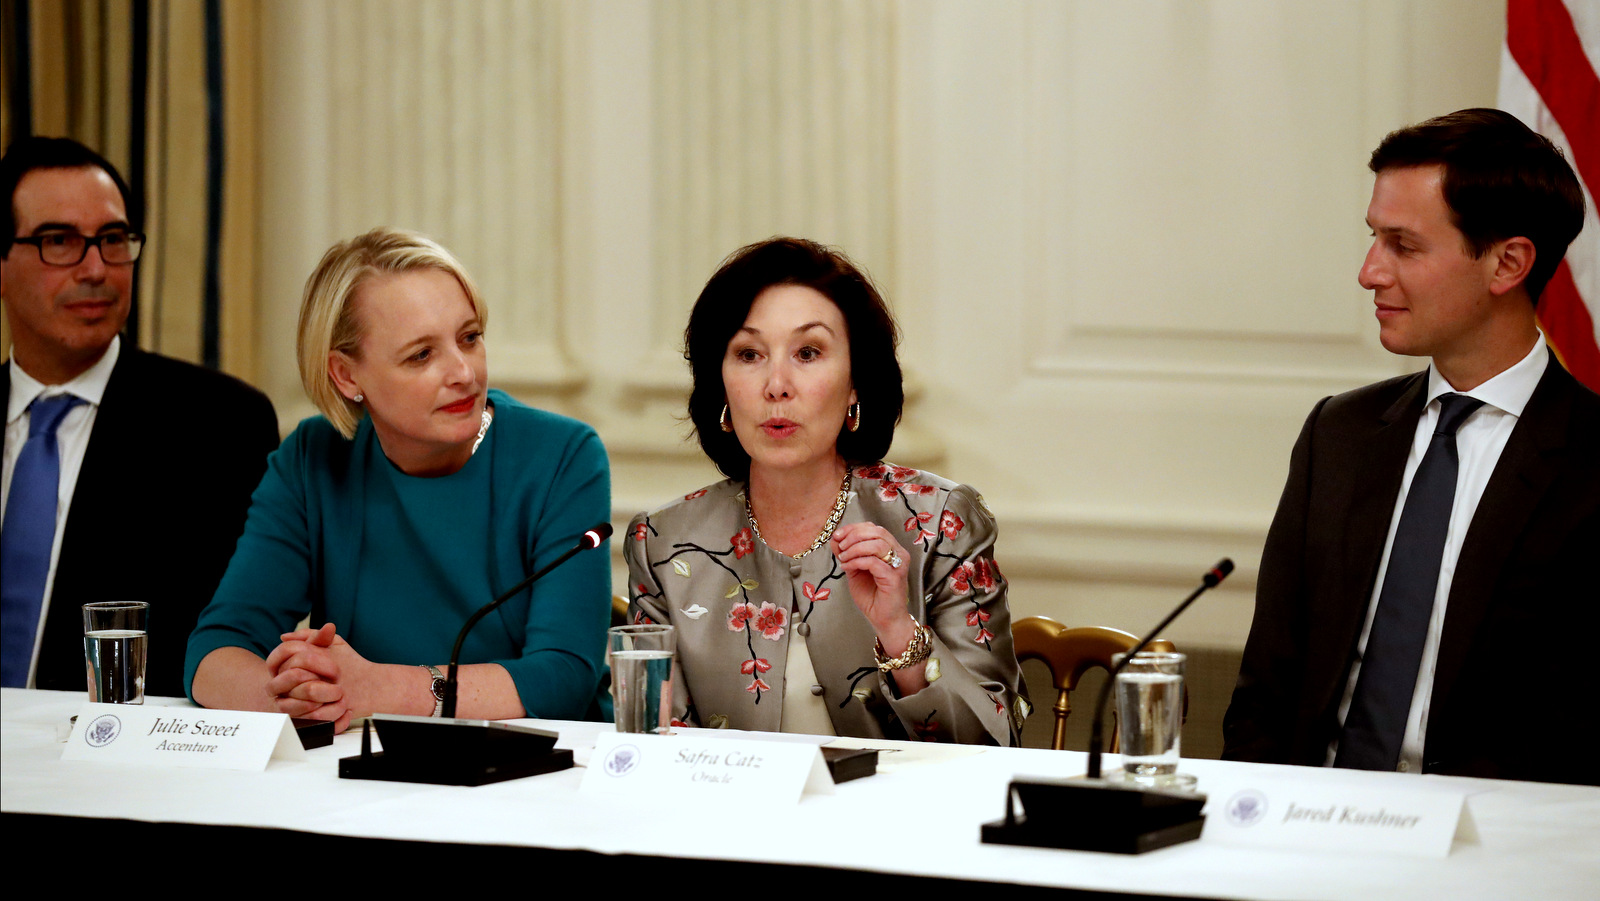 Safra Catz, Co-Chief Executive of Oracle speaks, with Jared Kushner, White House Senior Adviser, at right, in the State Dinning Room of the White House, June 19, 2017, in Washington. (AP/Alex Brandon)